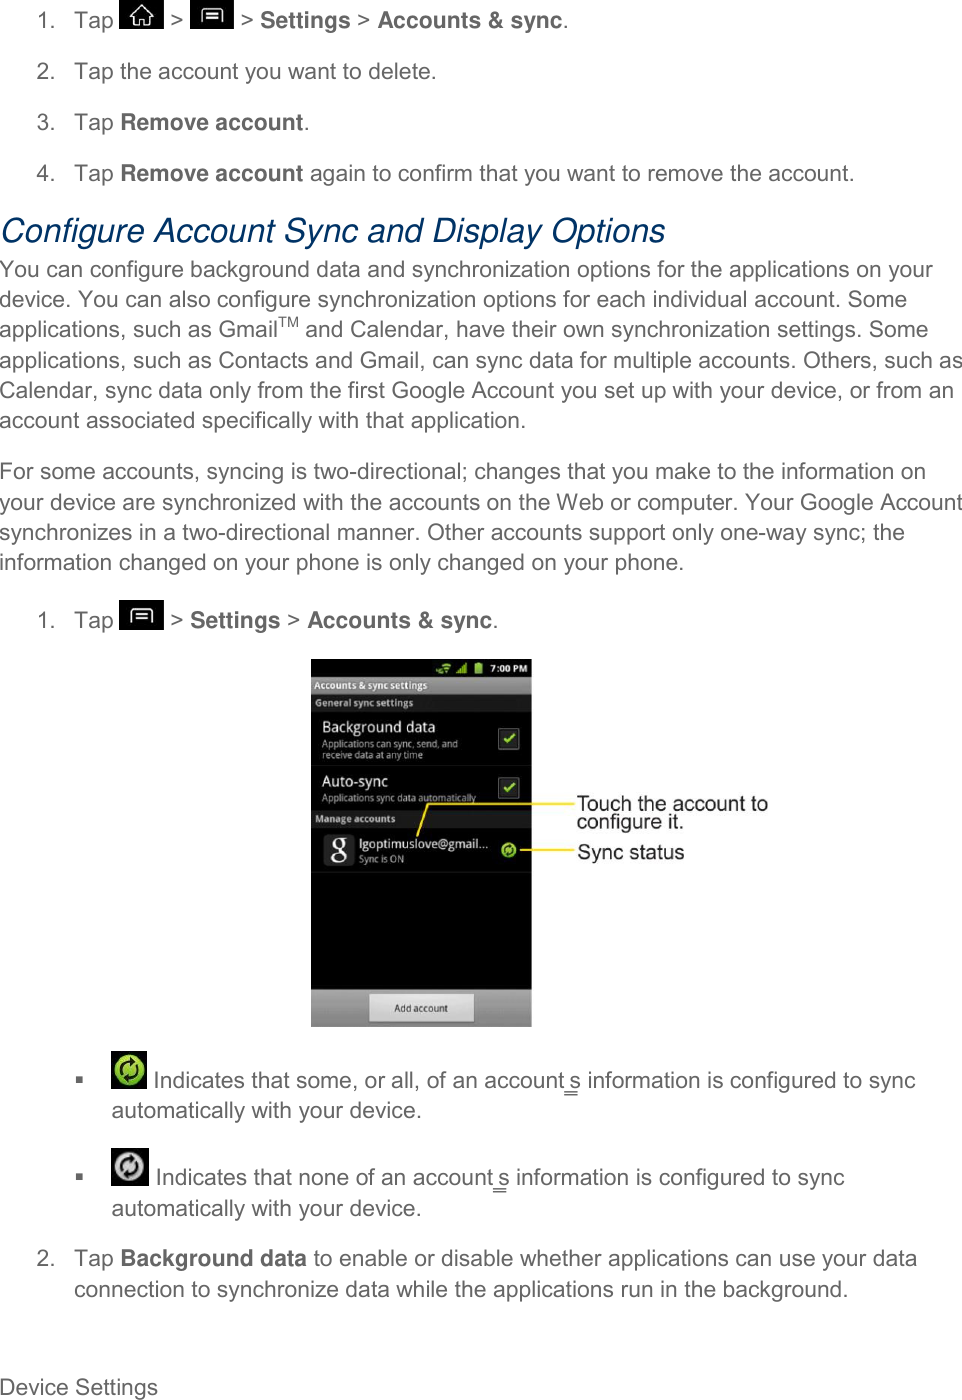 Device Settings     1.  Tap   &gt;   &gt; Settings &gt; Accounts &amp; sync. 2.  Tap the account you want to delete. 3.  Tap Remove account. 4.  Tap Remove account again to confirm that you want to remove the account. Configure Account Sync and Display Options You can configure background data and synchronization options for the applications on your device. You can also configure synchronization options for each individual account. Some applications, such as GmailTM and Calendar, have their own synchronization settings. Some applications, such as Contacts and Gmail, can sync data for multiple accounts. Others, such as Calendar, sync data only from the first Google Account you set up with your device, or from an account associated specifically with that application. For some accounts, syncing is two-directional; changes that you make to the information on your device are synchronized with the accounts on the Web or computer. Your Google Account synchronizes in a two-directional manner. Other accounts support only one-way sync; the information changed on your phone is only changed on your phone. 1.  Tap   &gt; Settings &gt; Accounts &amp; sync.     Indicates that some, or all, of an account‗s information is configured to sync automatically with your device.    Indicates that none of an account‗s information is configured to sync automatically with your device. 2.  Tap Background data to enable or disable whether applications can use your data connection to synchronize data while the applications run in the background. 